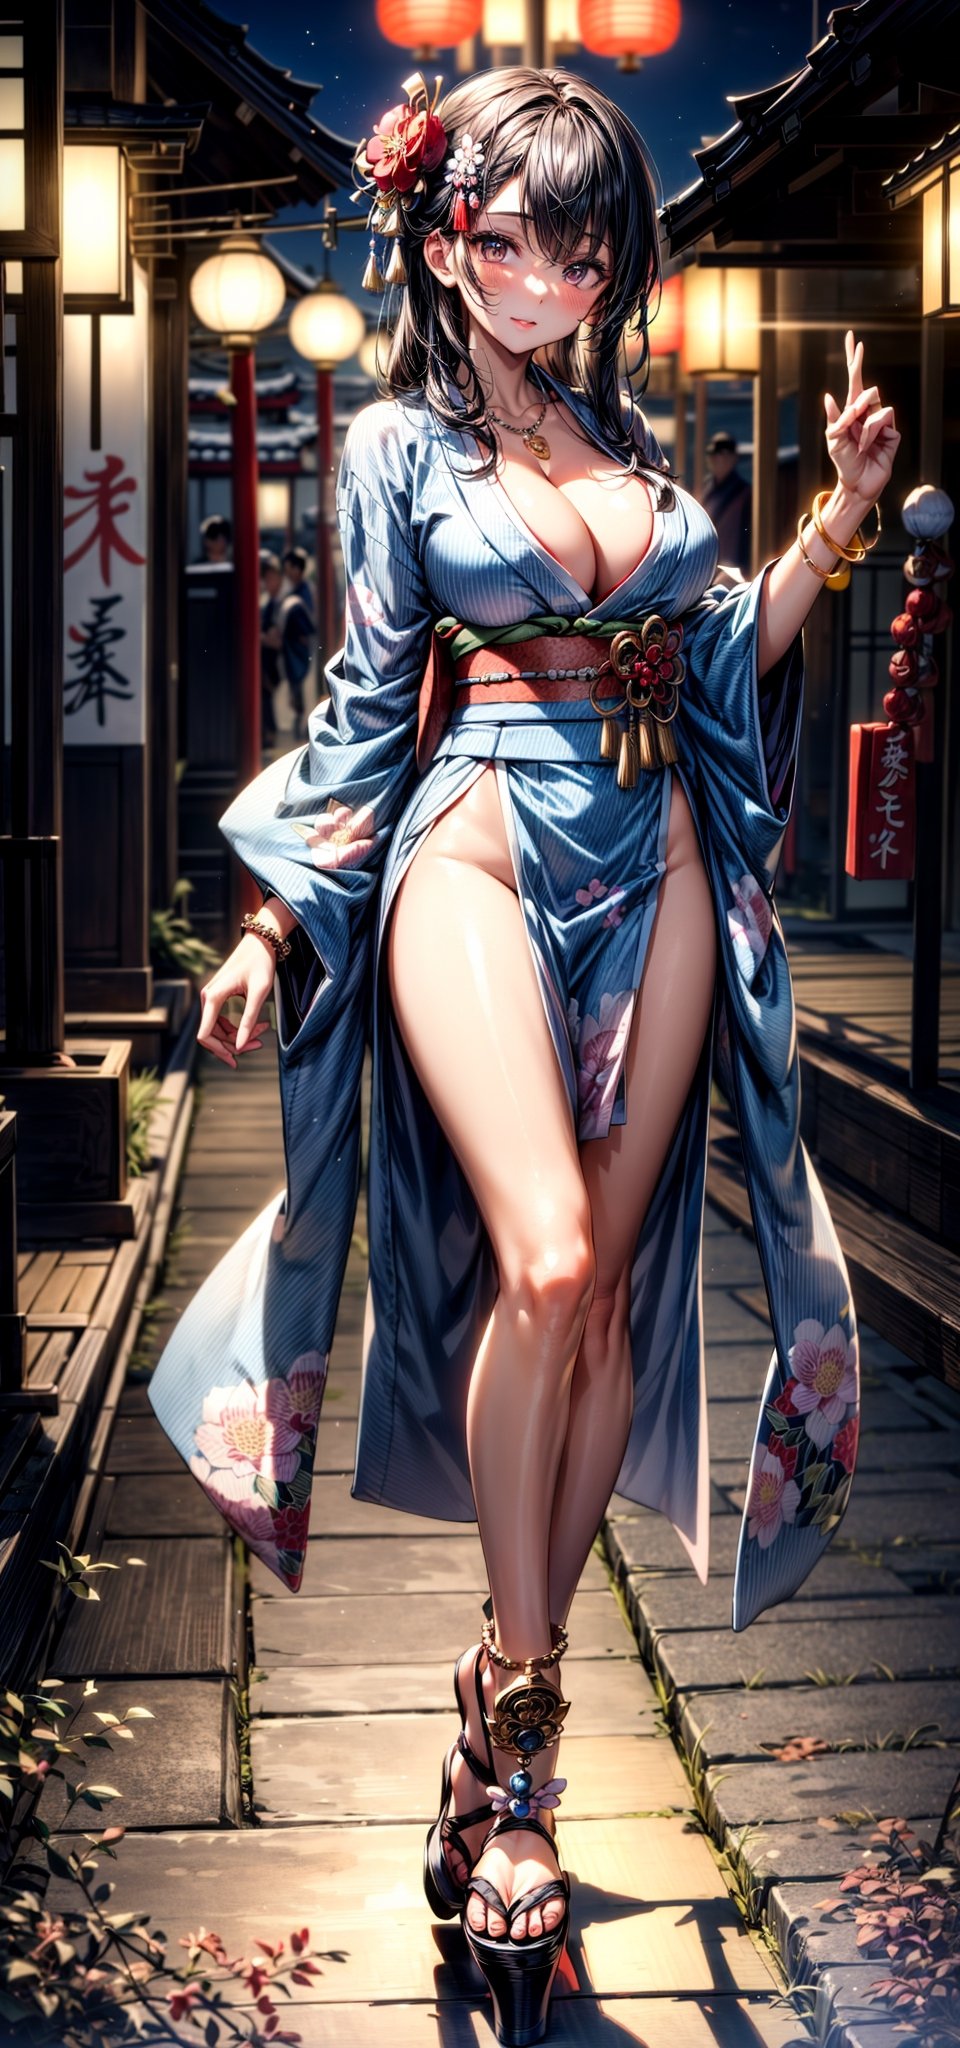 ((legs wide open, crotch wide open)), (cinematic light, top quality, 8K, masterpiece: 1.3), (world wonderful, goddess of Japan, Japan beautiful girl, Korean goddess), (upper body), (one girl), (necklace, bracelet, anklet, leg ring), (huge, cleavage, exposed breasts, sexy cleavage, very detailed breasts), (huge breasts), À la Fed woman in kimono, kimono, classic kimono, kimono, Japan kimono, long beautiful flowing kimono, intricate geisha kimono, red or purple kimono with floral pattern, Japanese style, wearing kimono, legs wide open, crotch wide open, inspired by Kano Hogai,